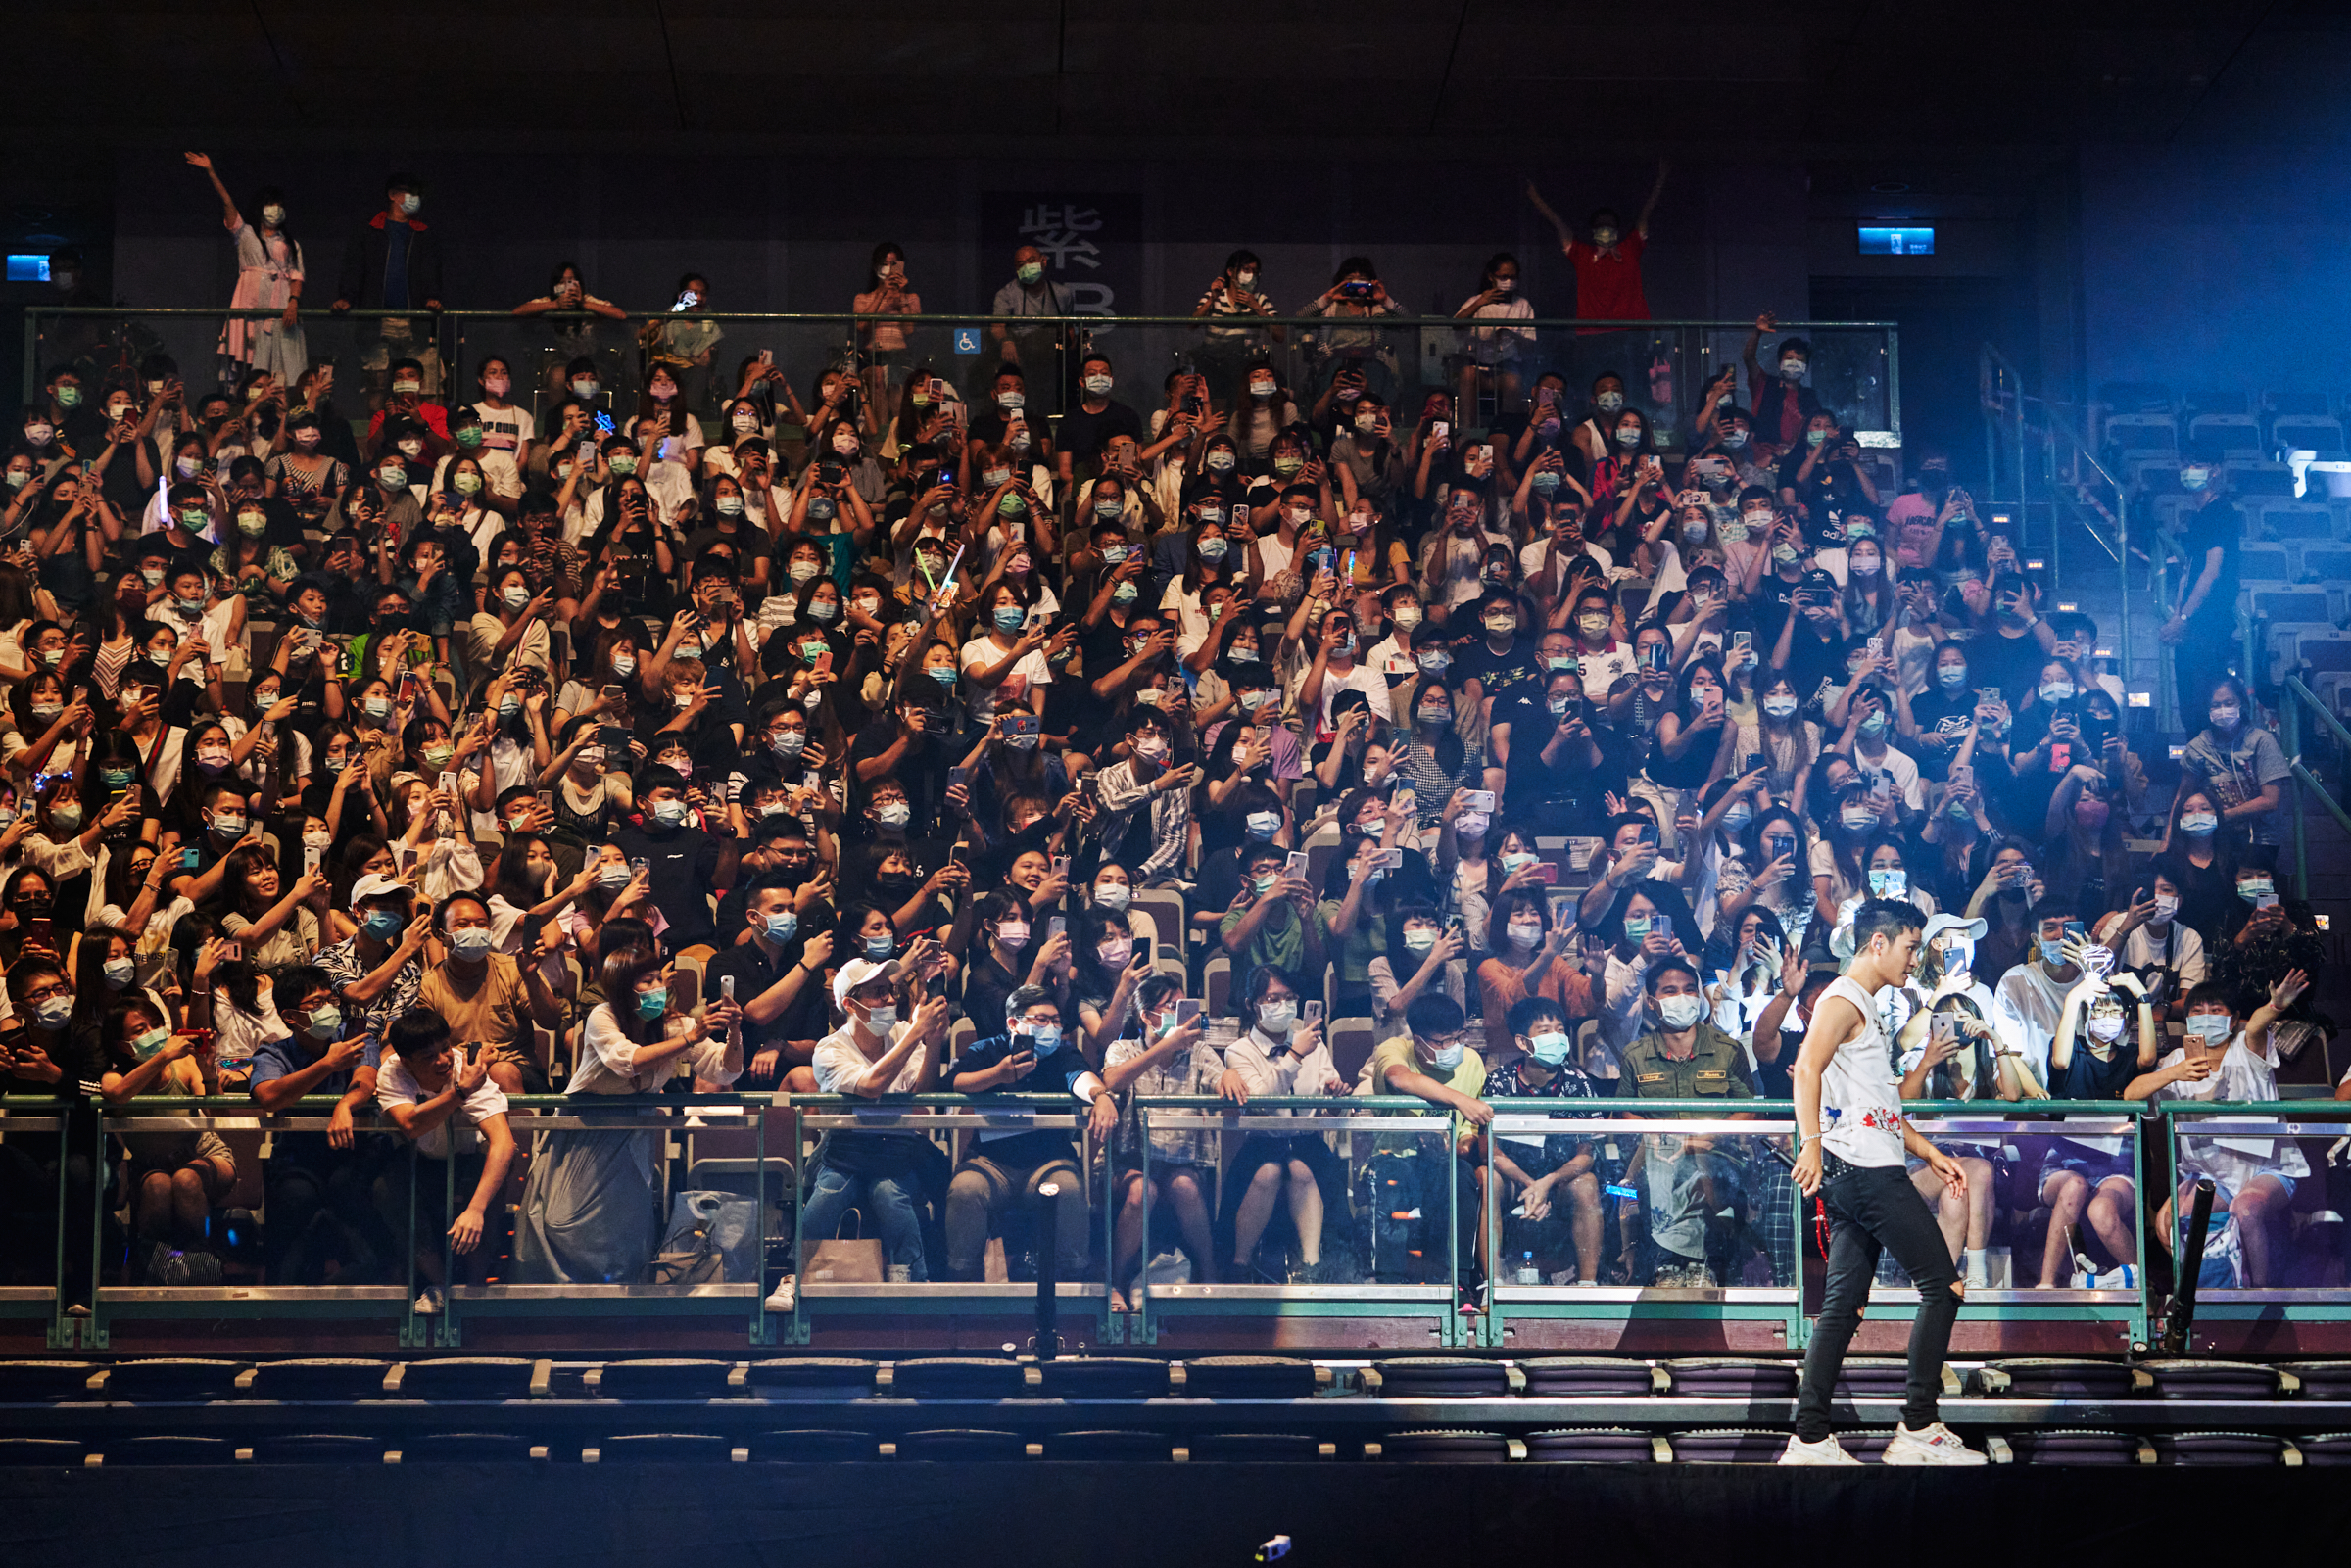 Eric Chou walks on an extended stageÊthat brought him close to fans sitting on the second level of the Taipei Arena on Aug. 8, 2020.